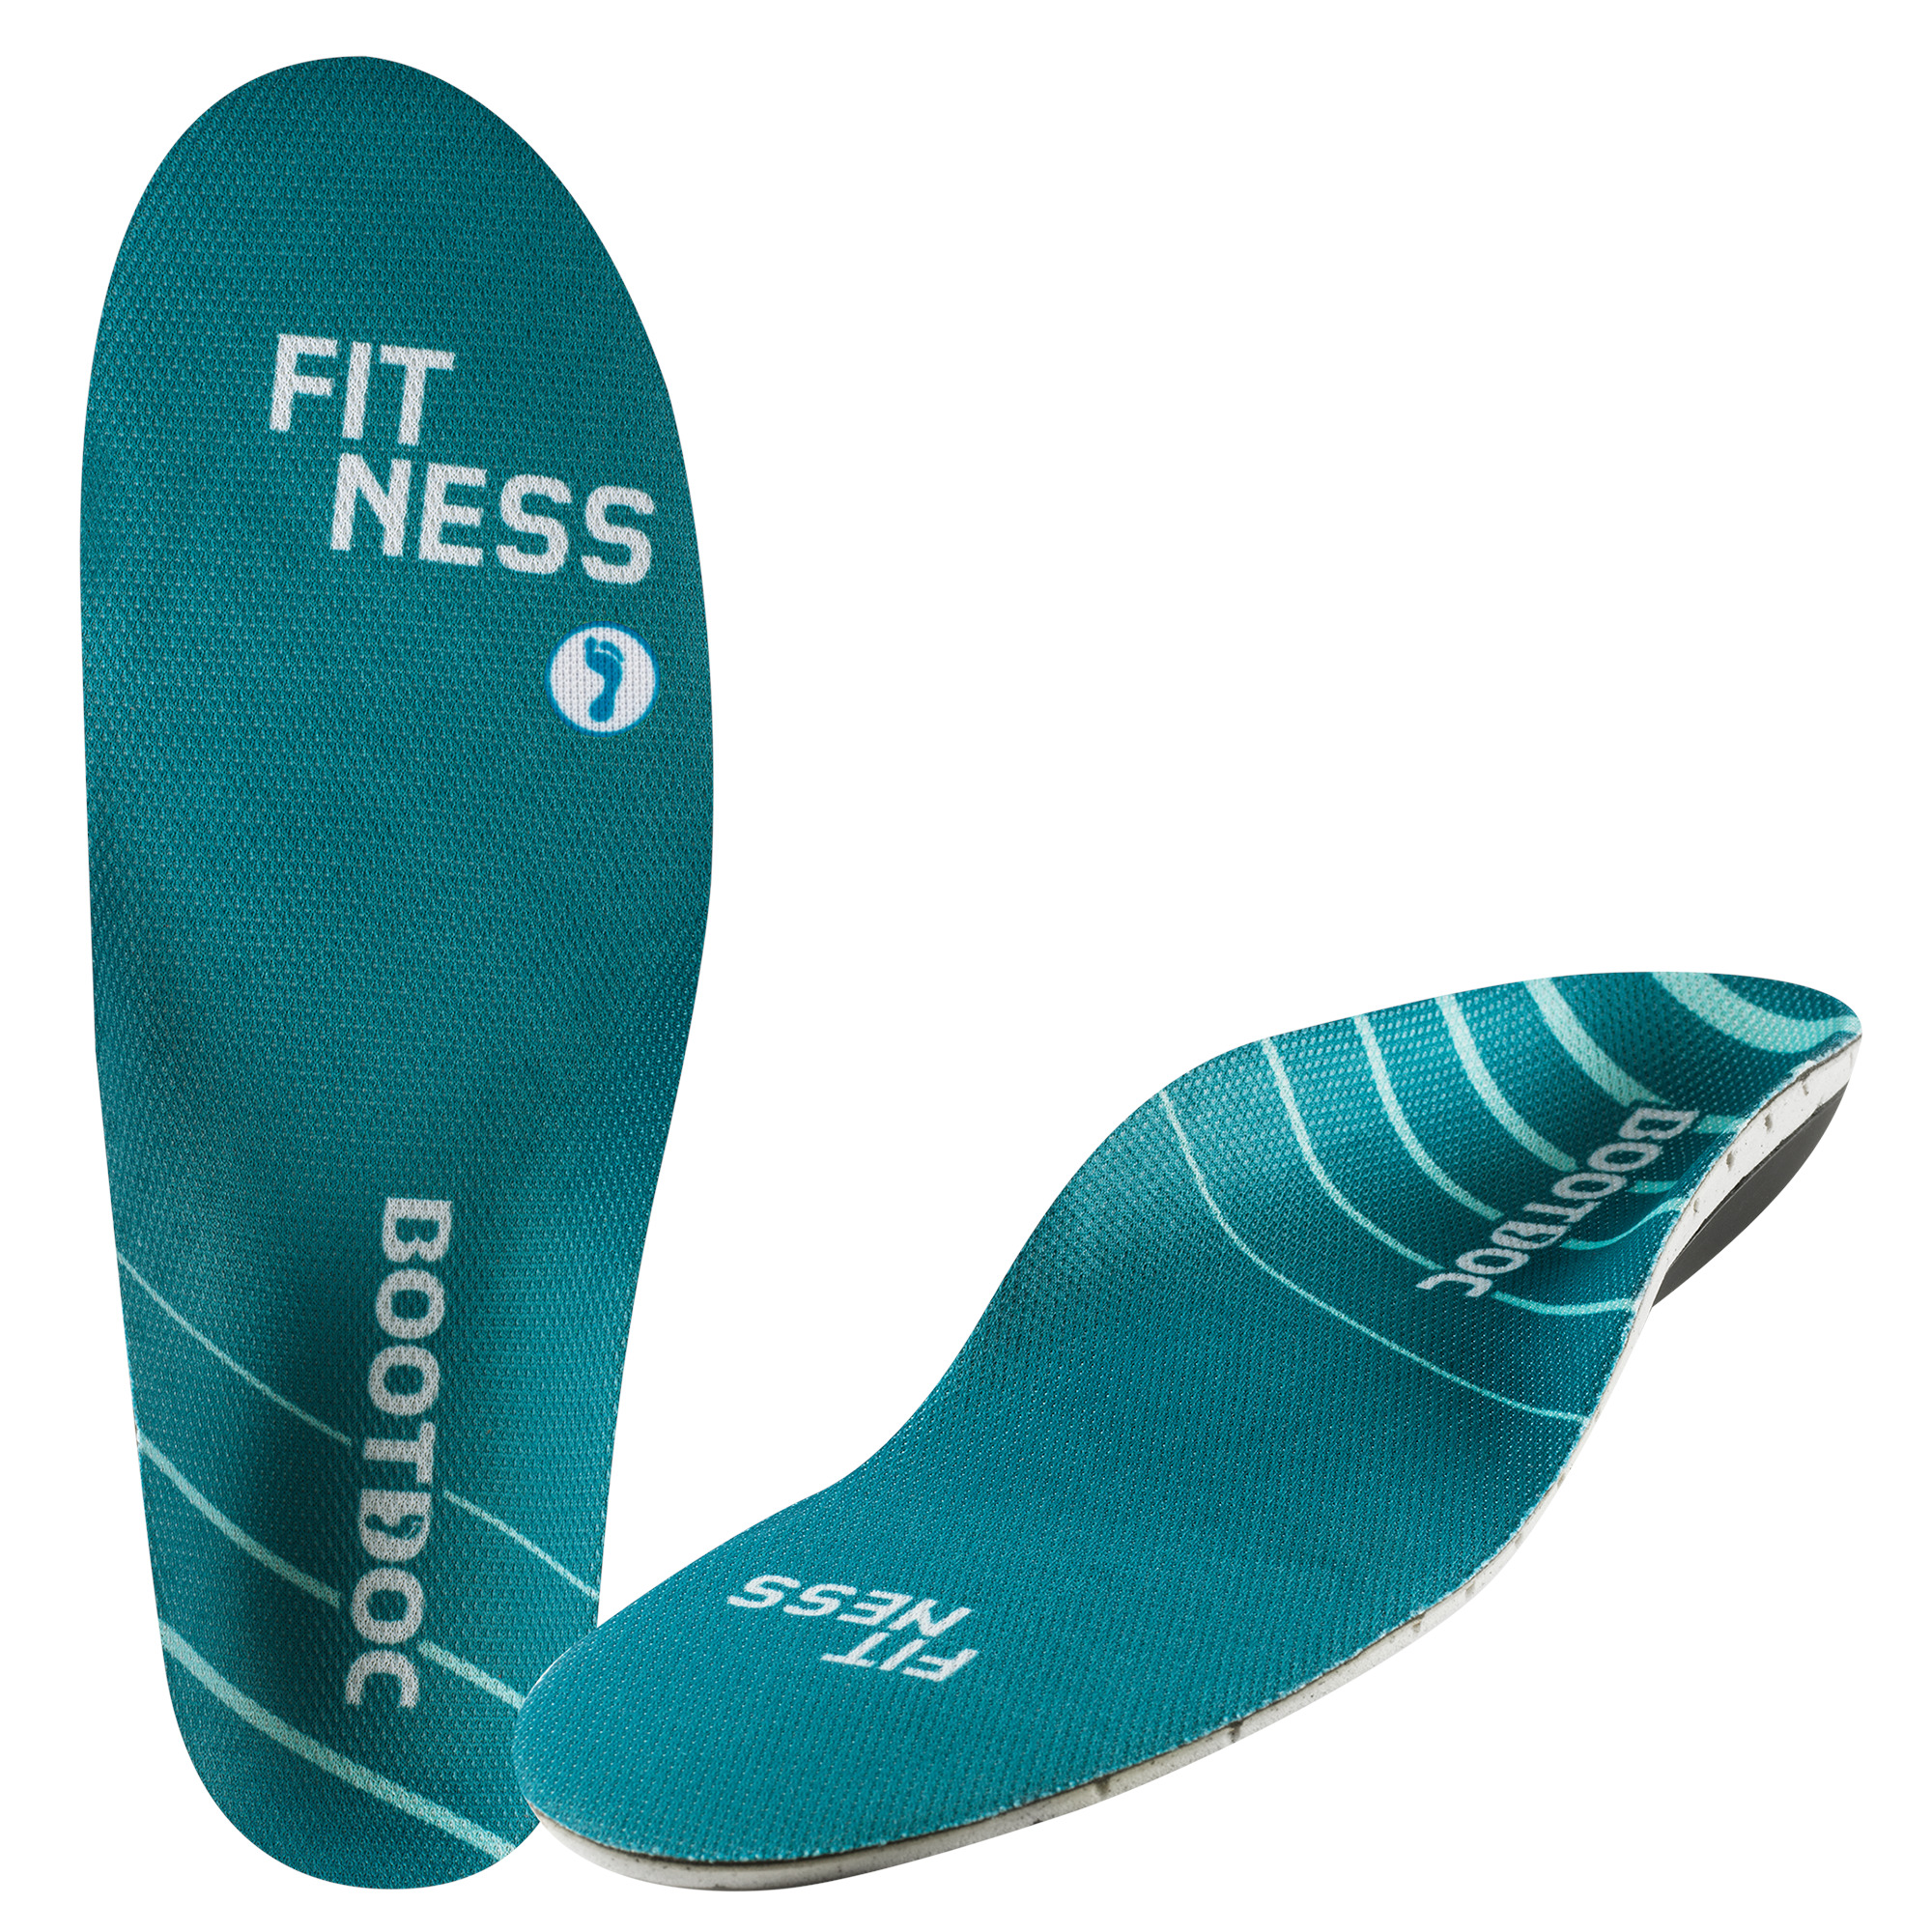 FITNESS Mid Arch insoles